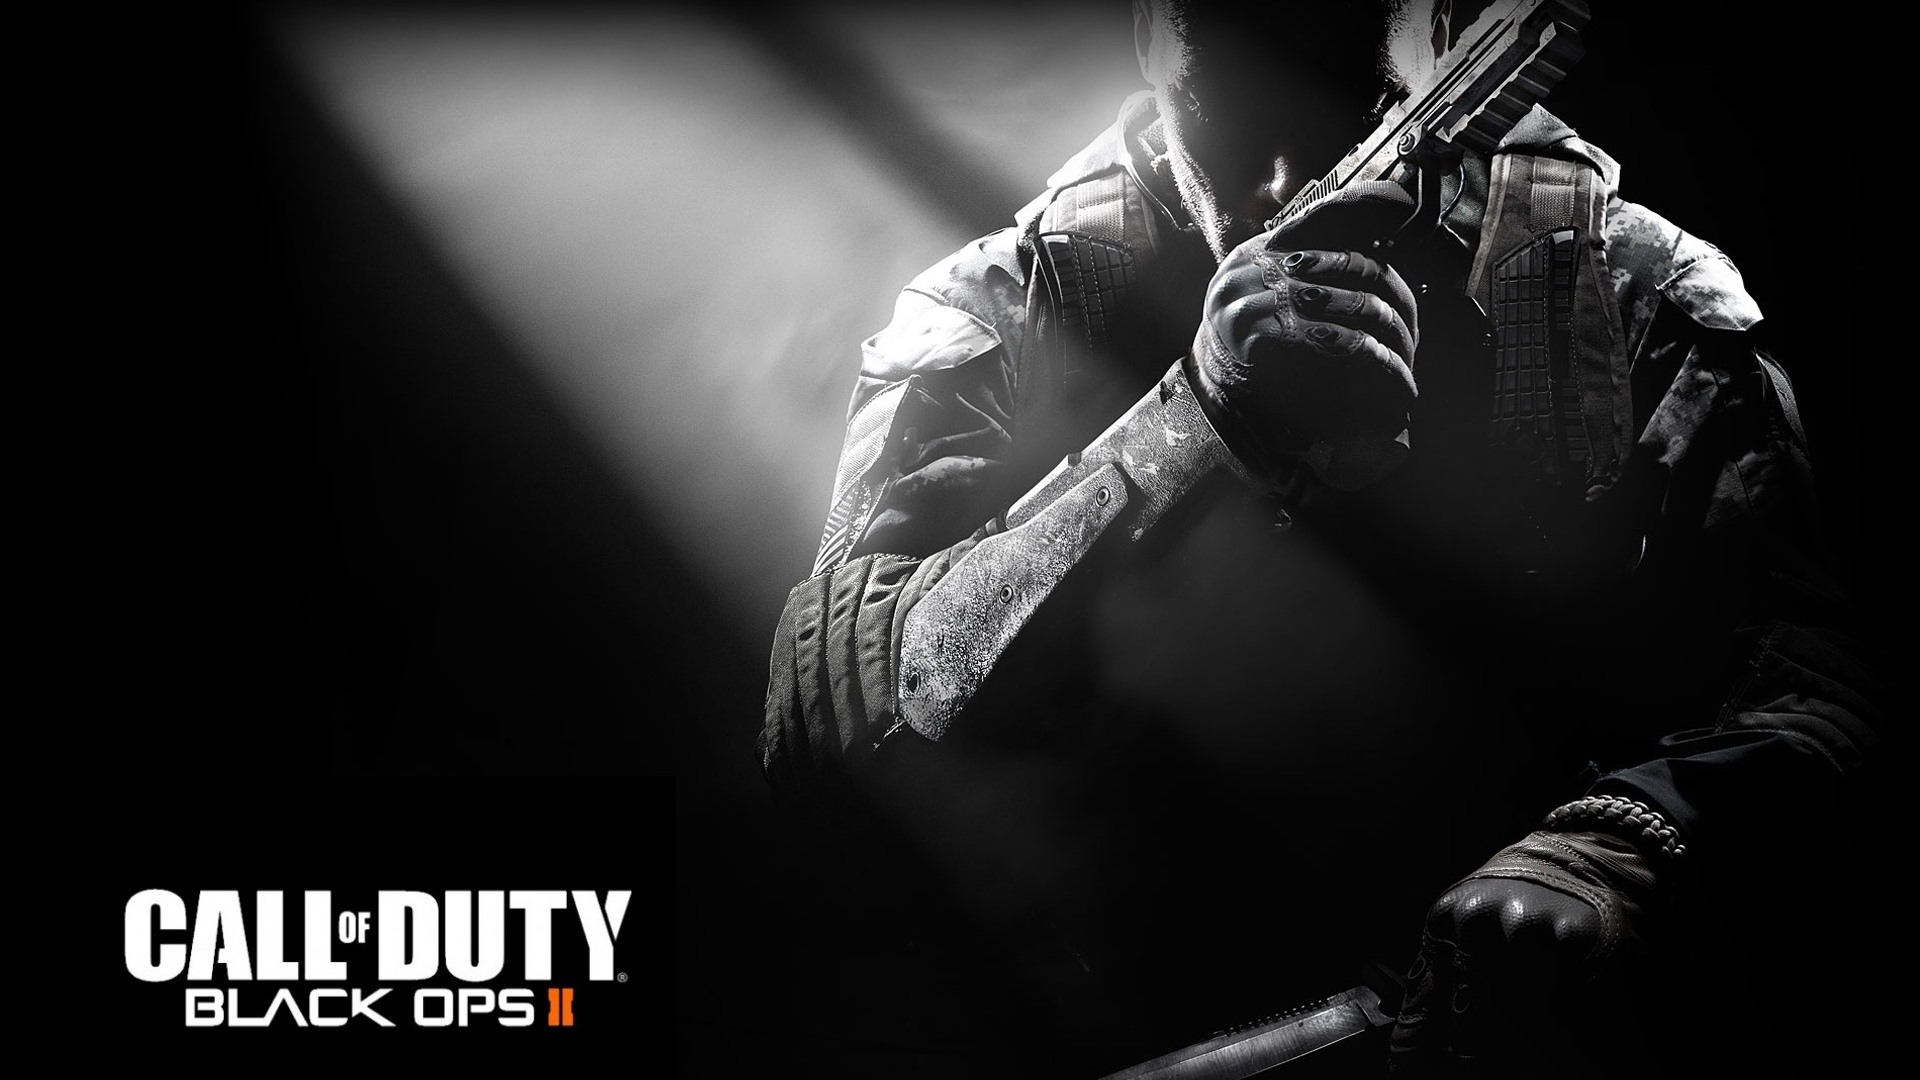 Call of Duty: Black Ops 2 HD wallpapers #11 - 1920x1080